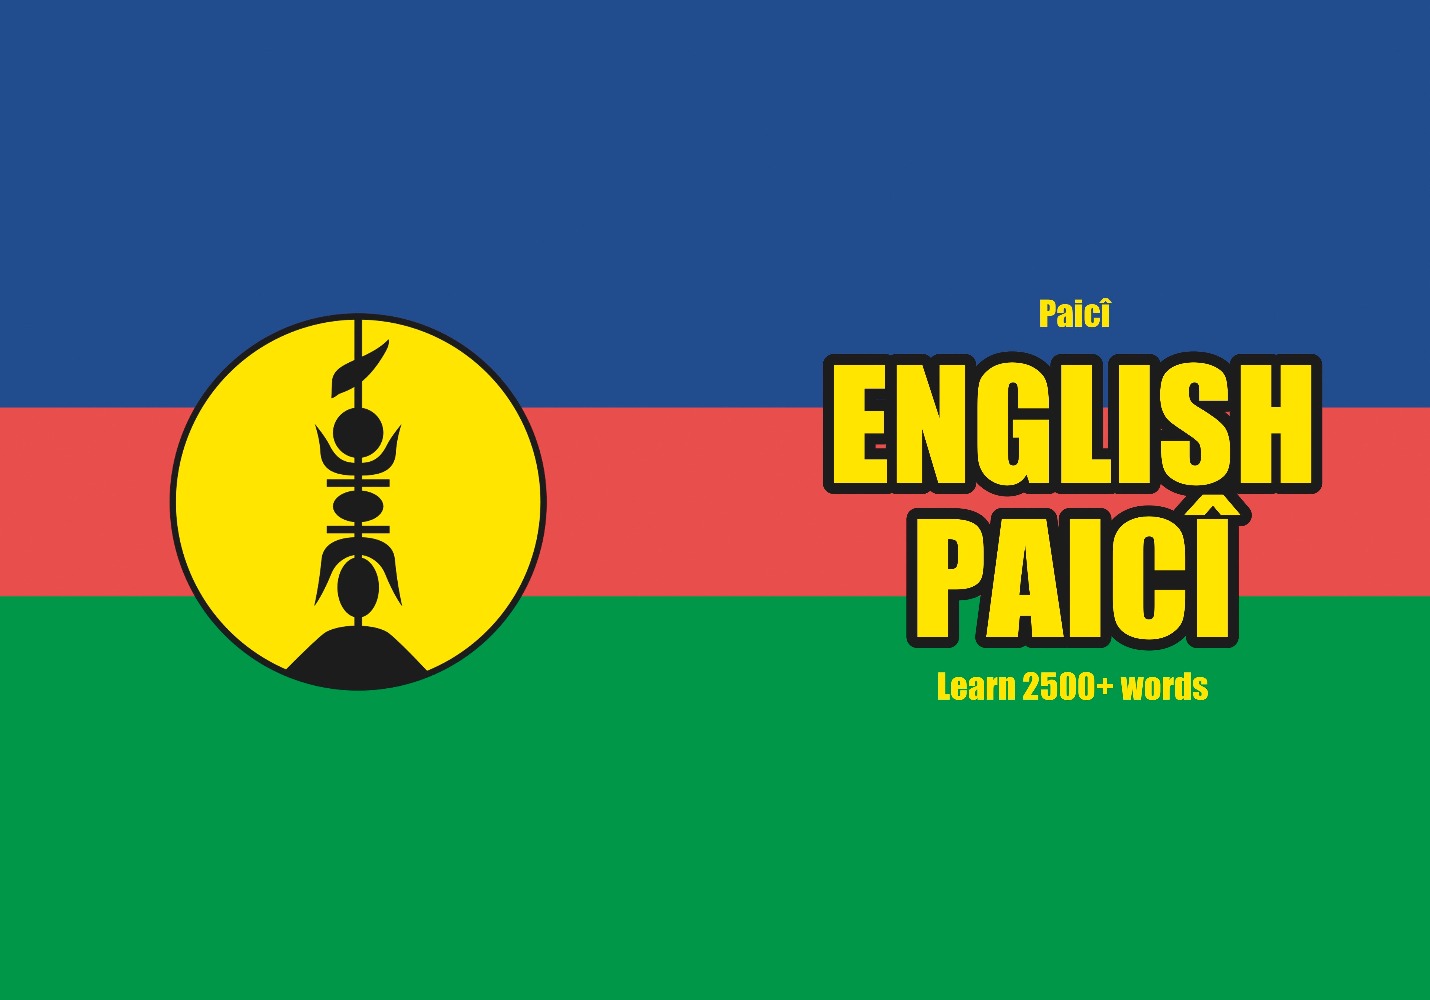 Paicî language learning notebook cover